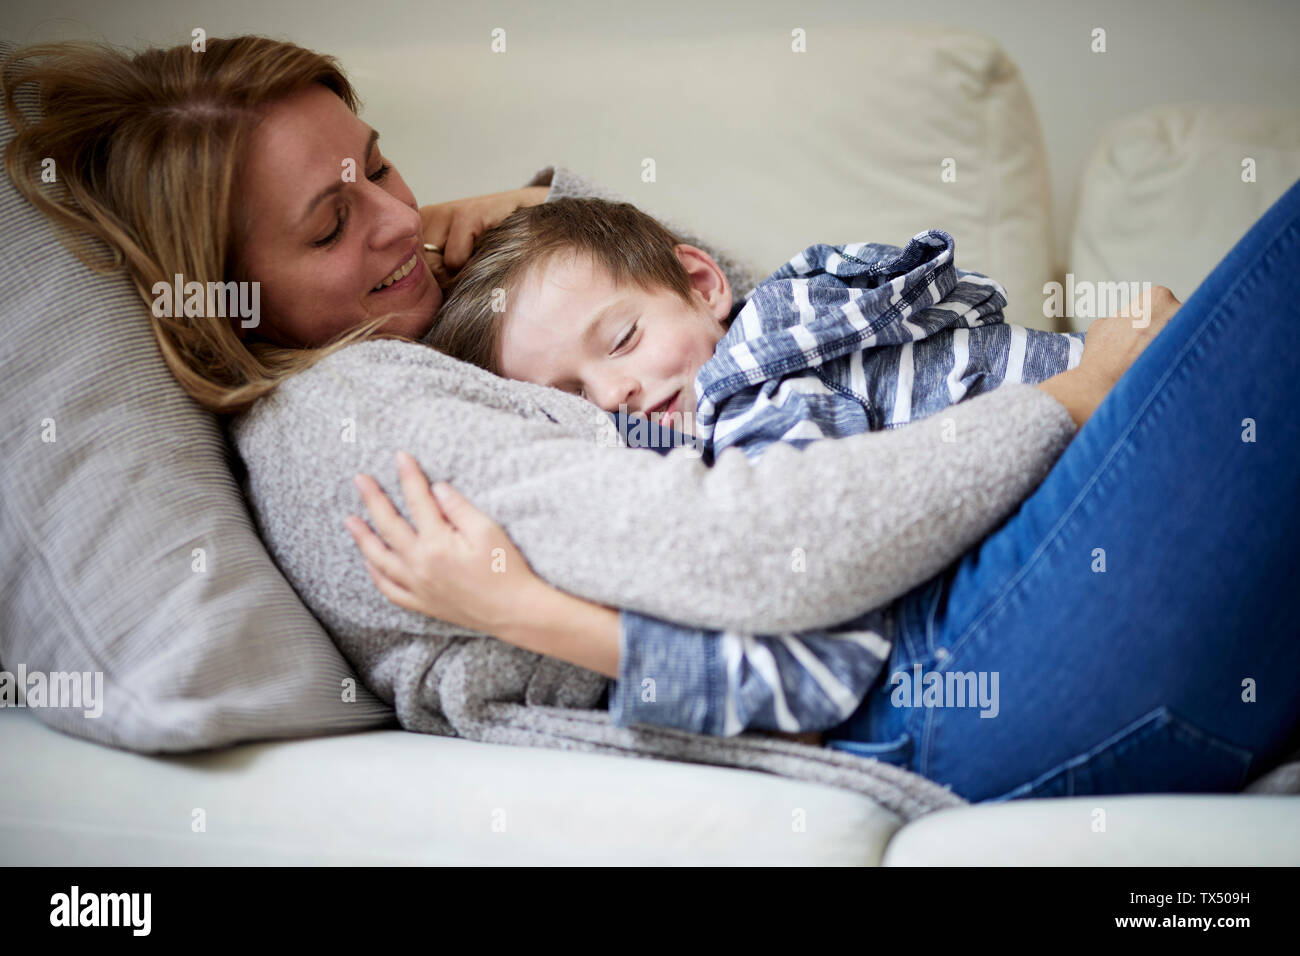 Mother and son cuddling on the couch Stock Photo